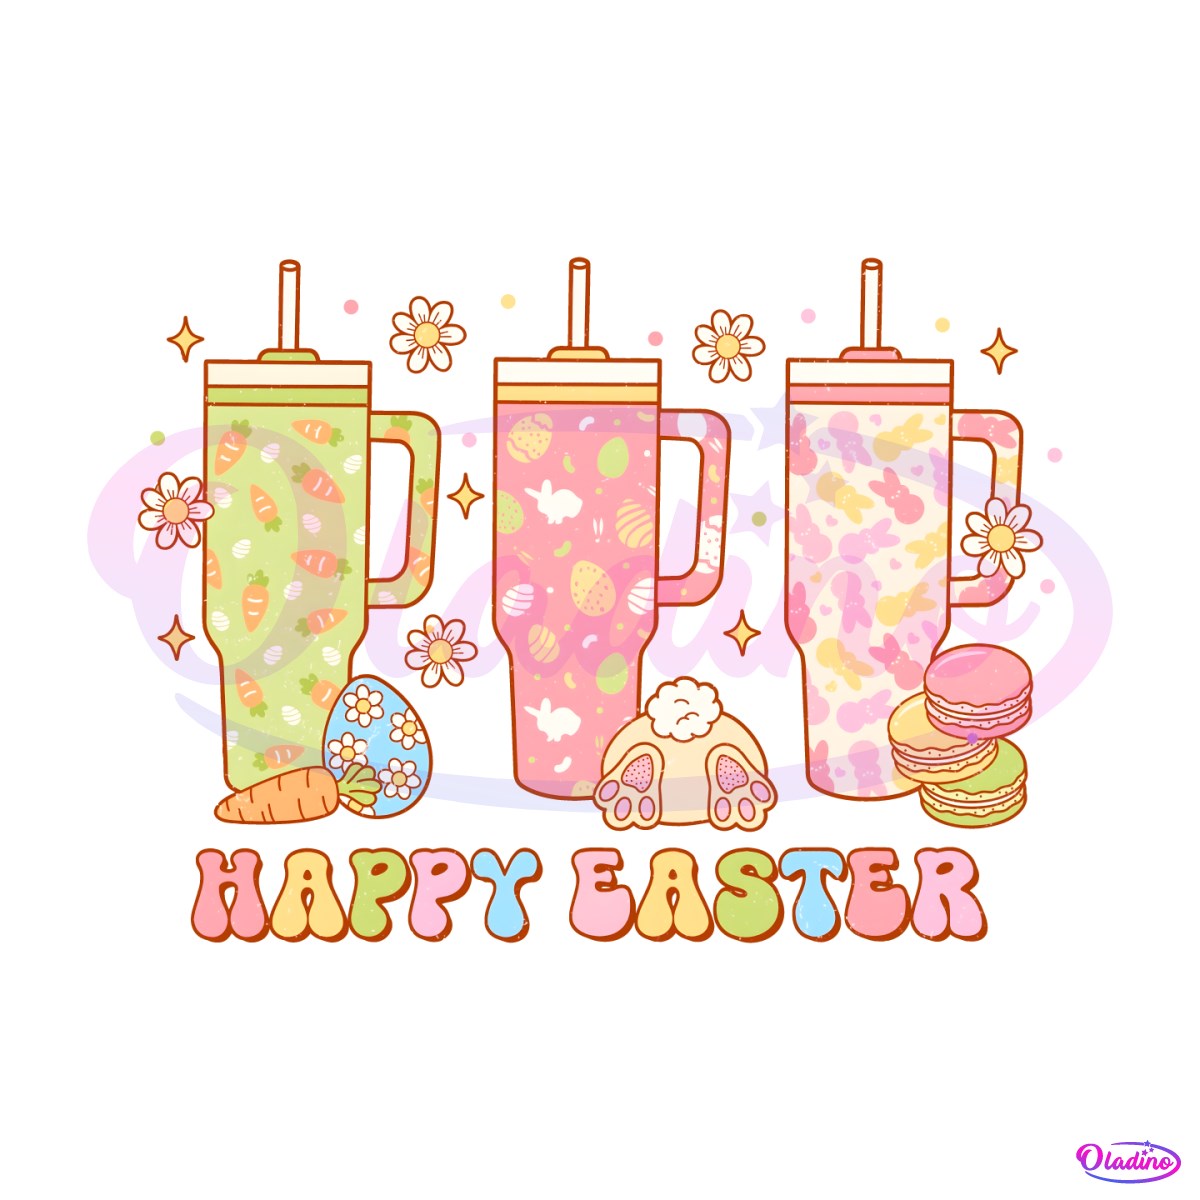 retro-obsessive-cup-disorder-happy-easter-png